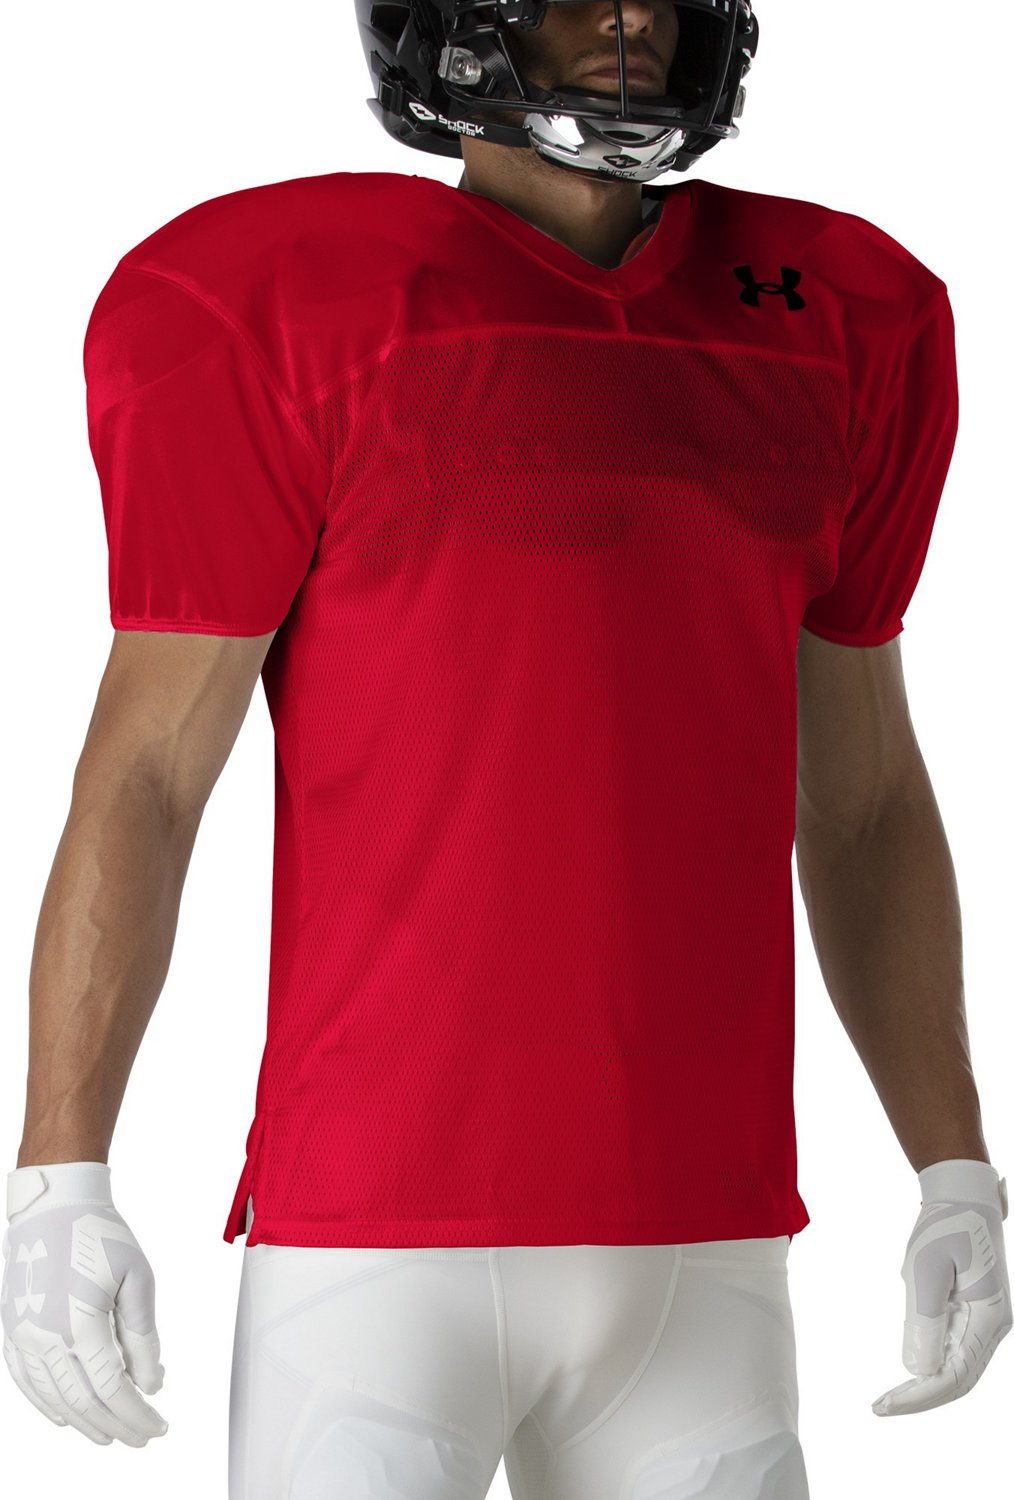 Adidas Youth Audible 2.0 Practice Football Jersey